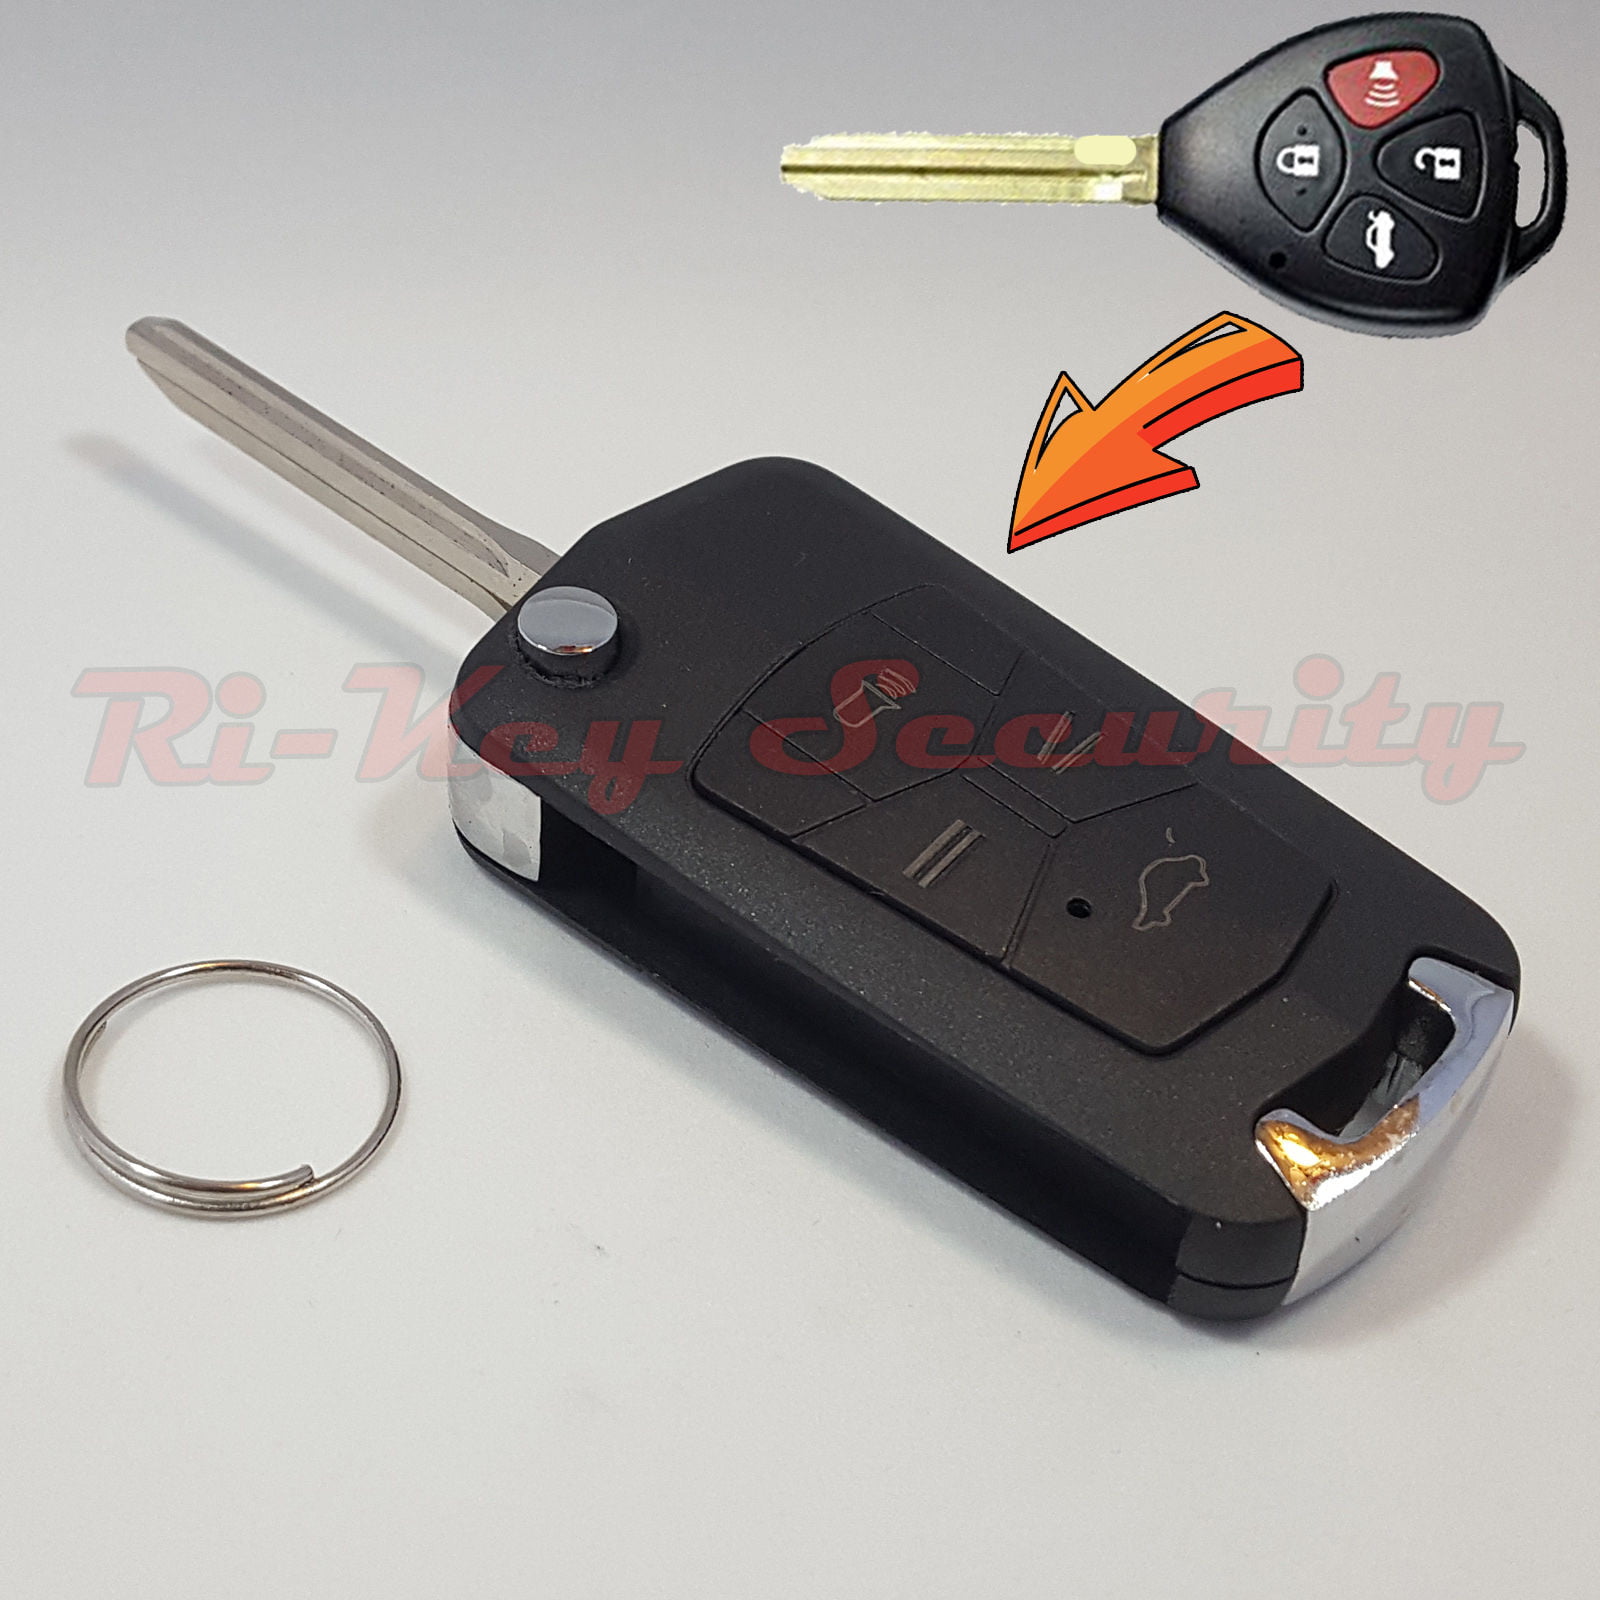 New Flip Key Modified Case Shell For Toyota and Scion Remote Key 4 ...